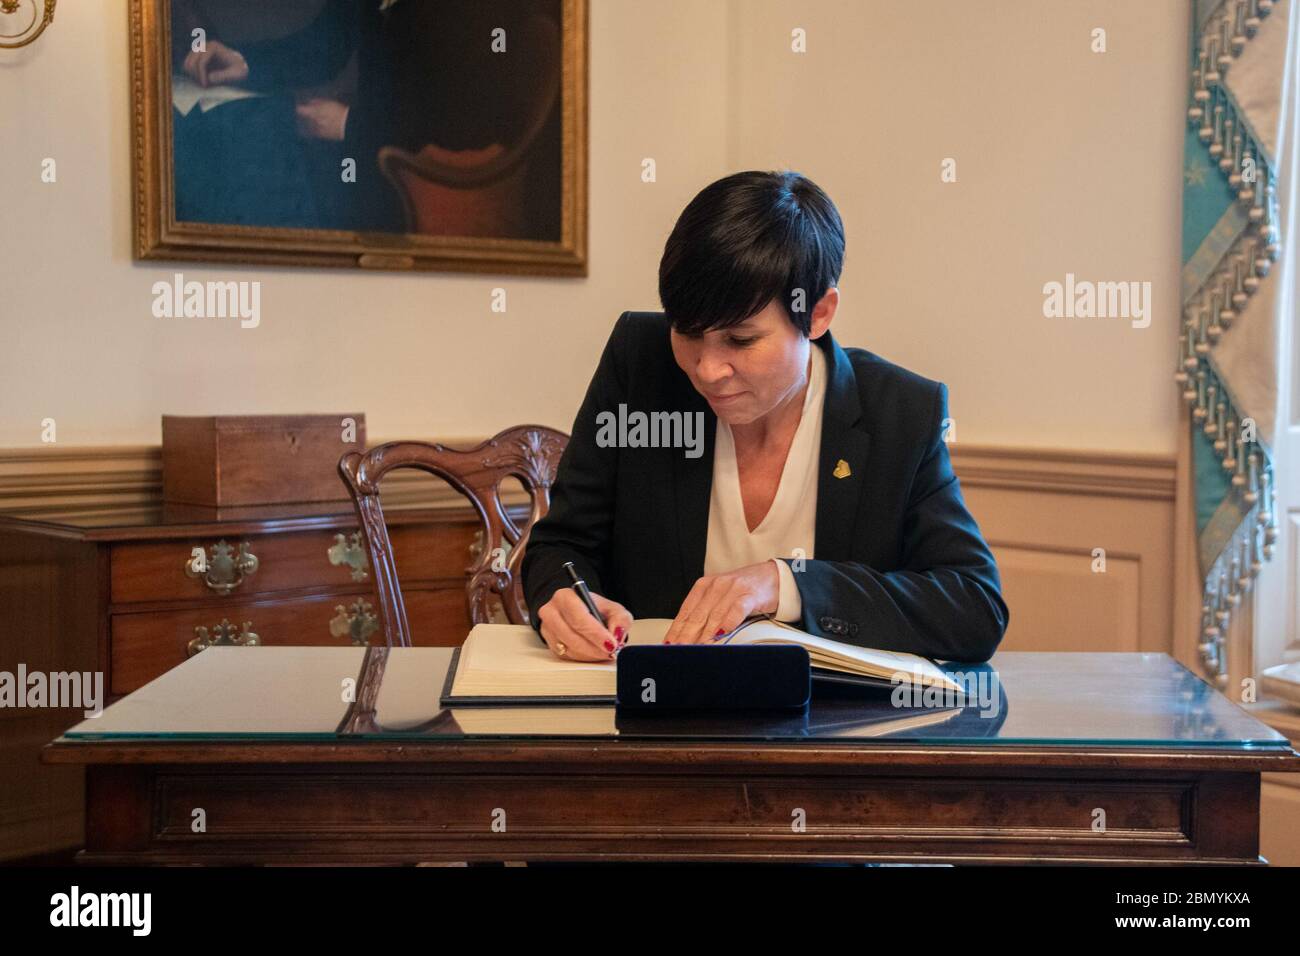 Norwegian Foreign Minister Søreide Signs Secretary Pompeo’s Guestbook Norwegian Foreign Minister Ine Marie Eriksen Søreide signs Secretary of State Michael R. Pompeo’s guestbook before their bilateral meeting at the U.S. Department of State in Washington, D.C., on November 12, 2019. Stock Photo